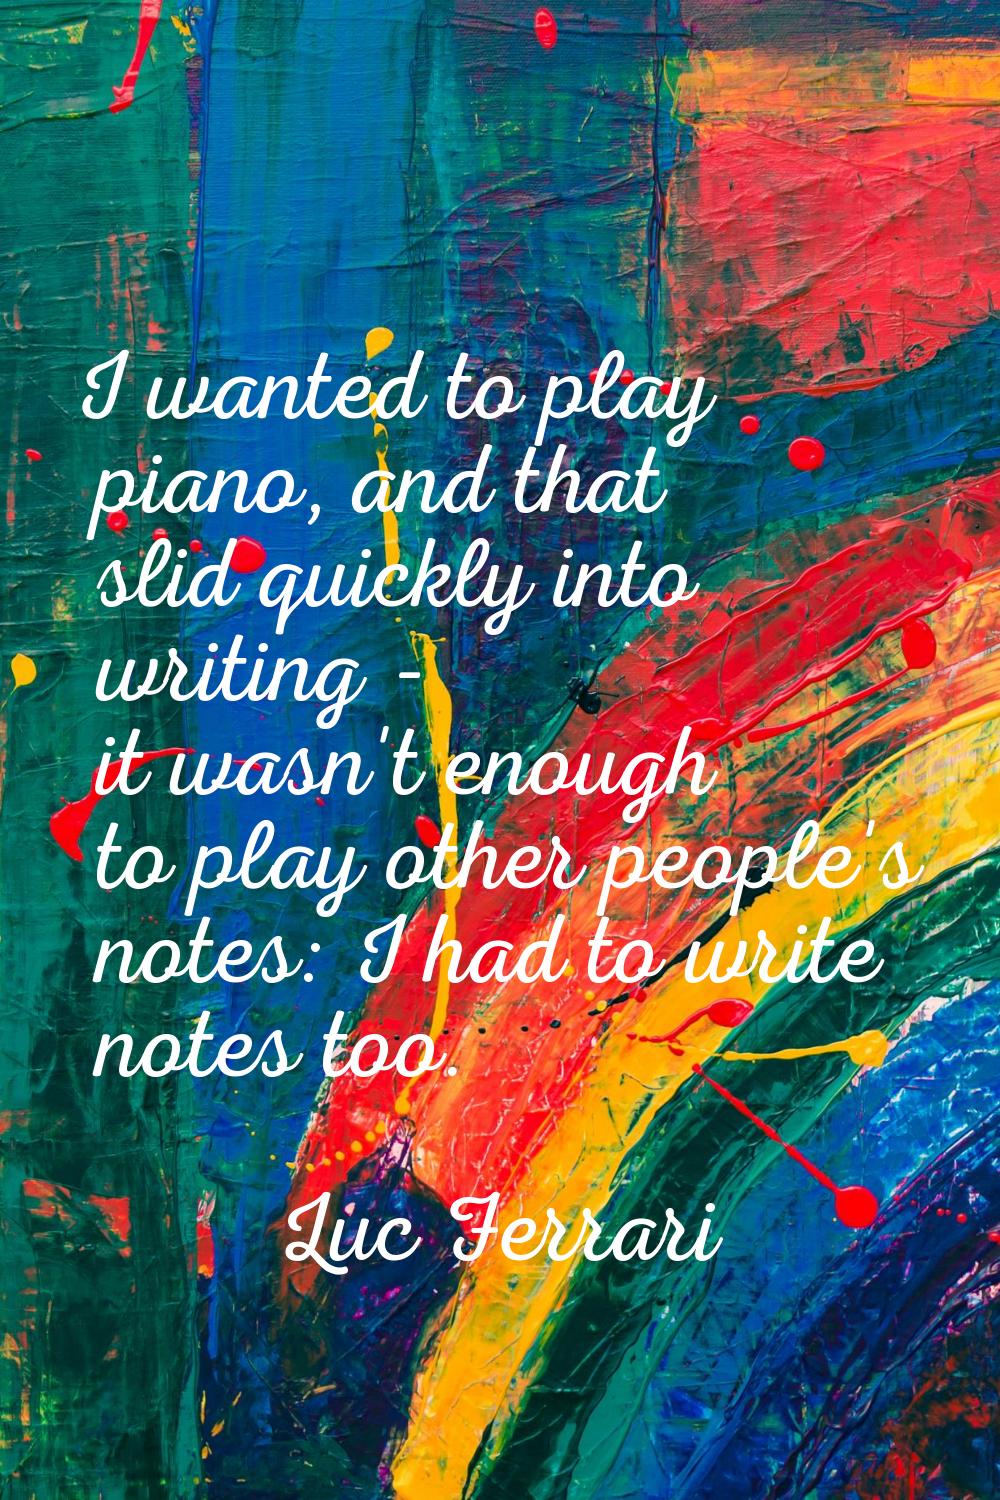 I wanted to play piano, and that slid quickly into writing - it wasn't enough to play other people'